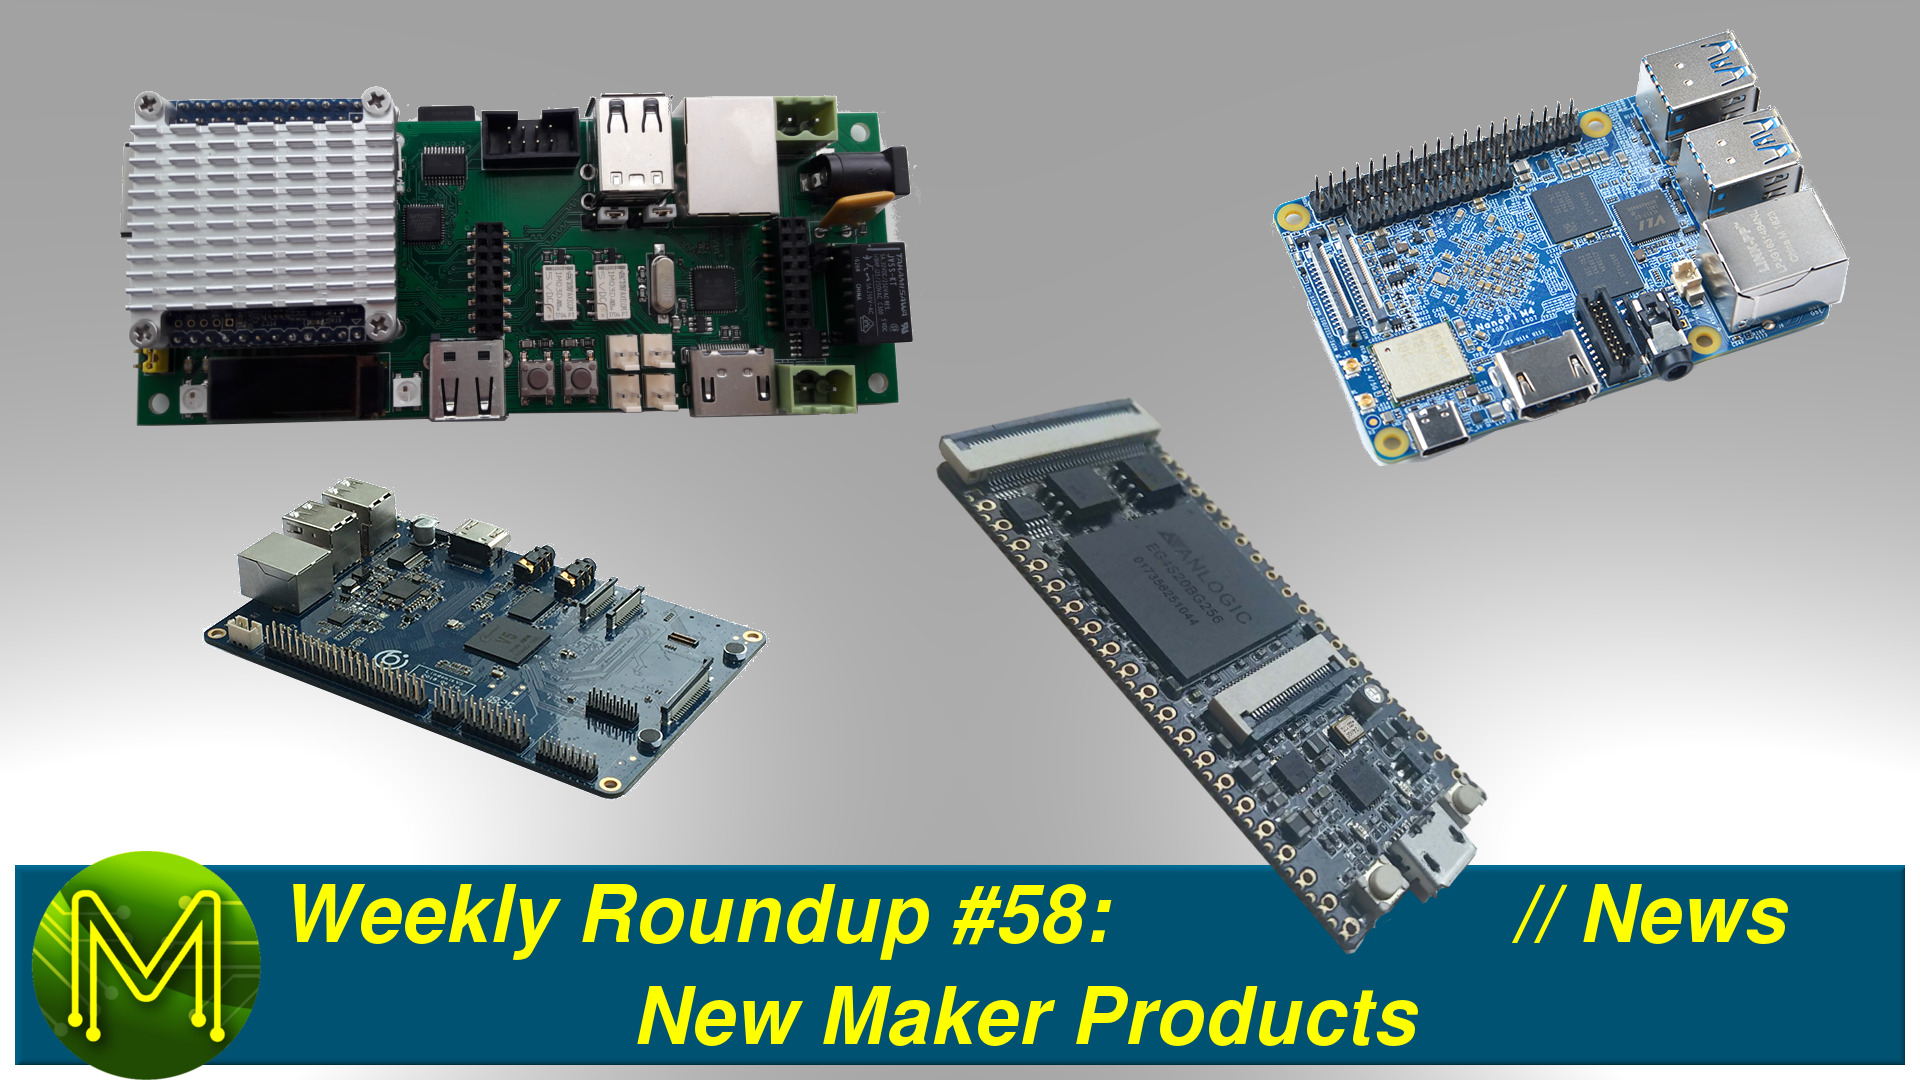 Weekly Roundup #58: New Maker Products // News